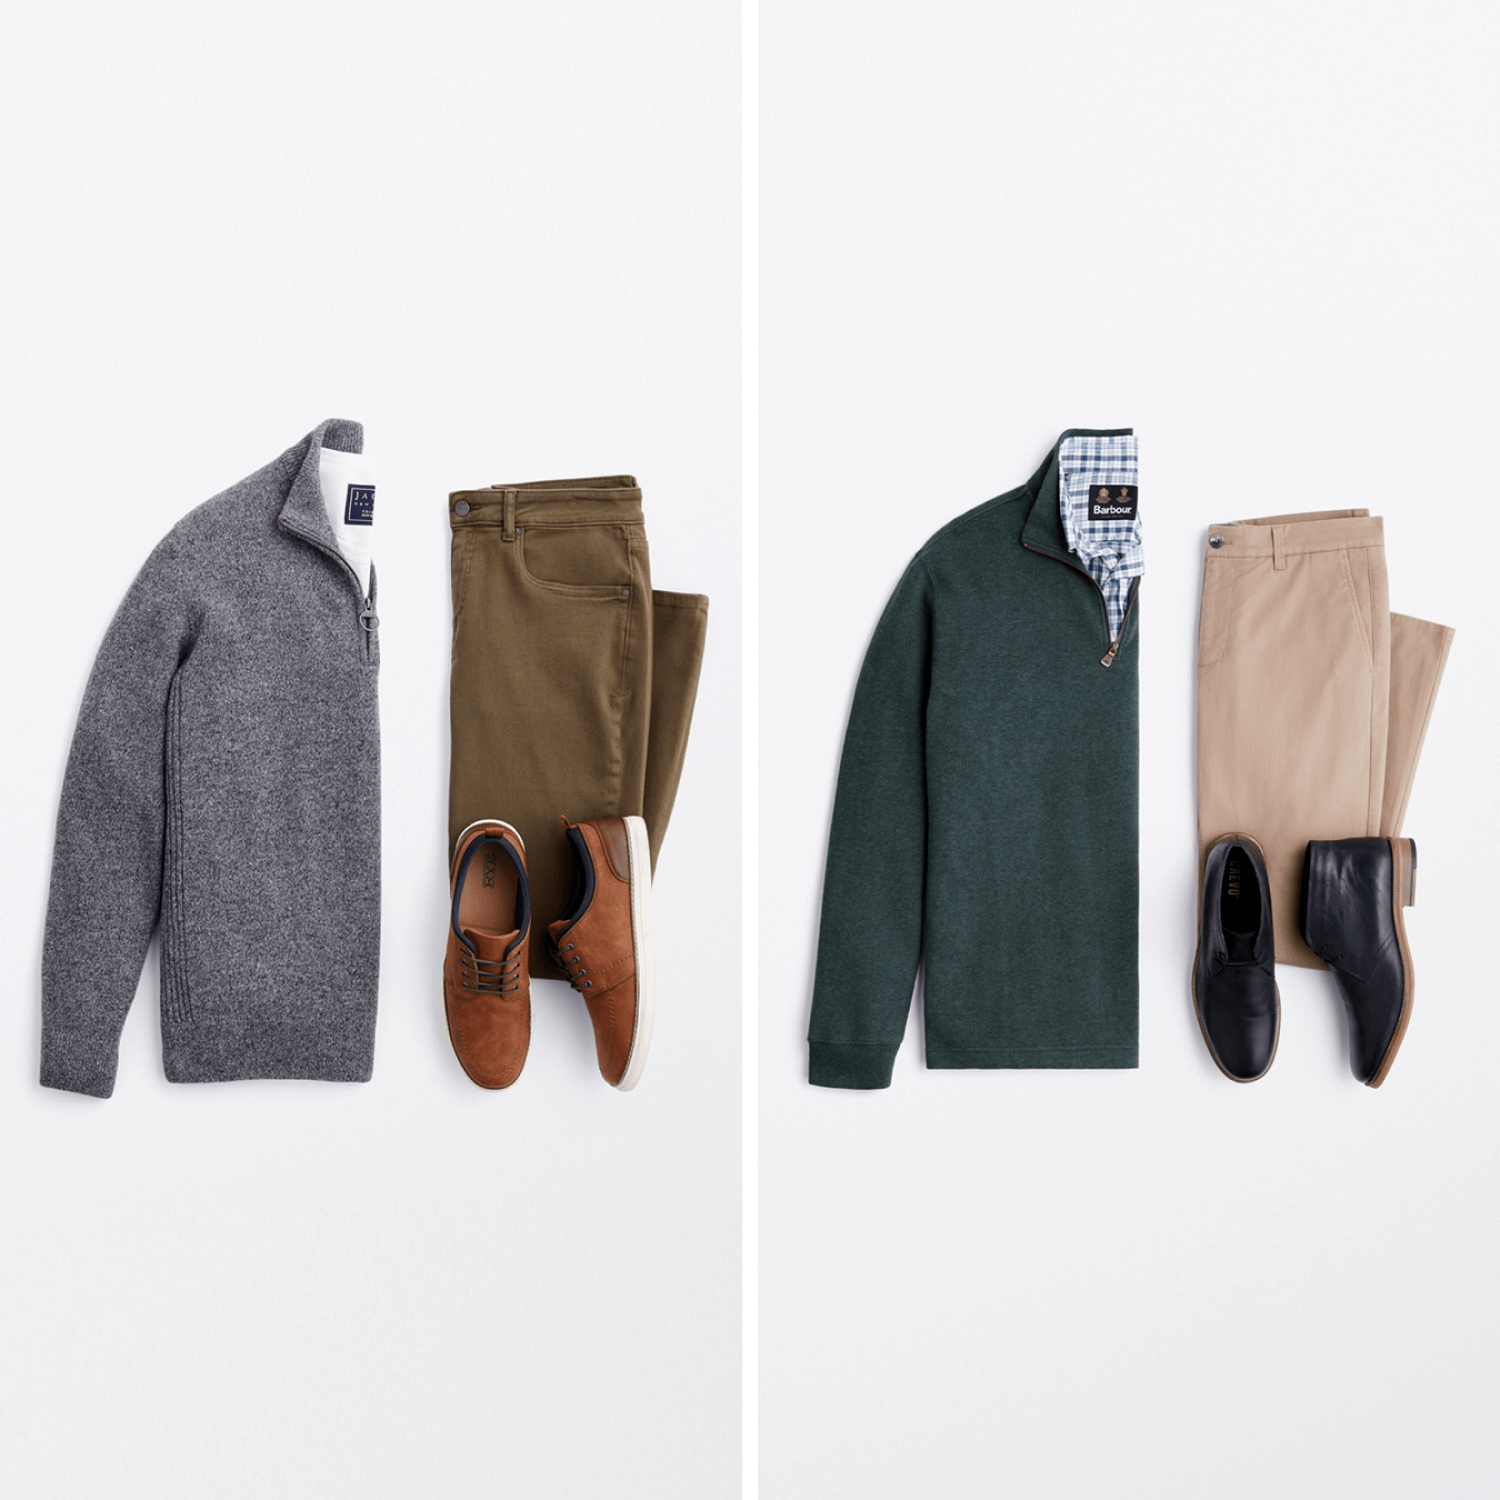 What to Wear to Work: 4 Fall Outfits to Try at the Office | Stitch Fix Men